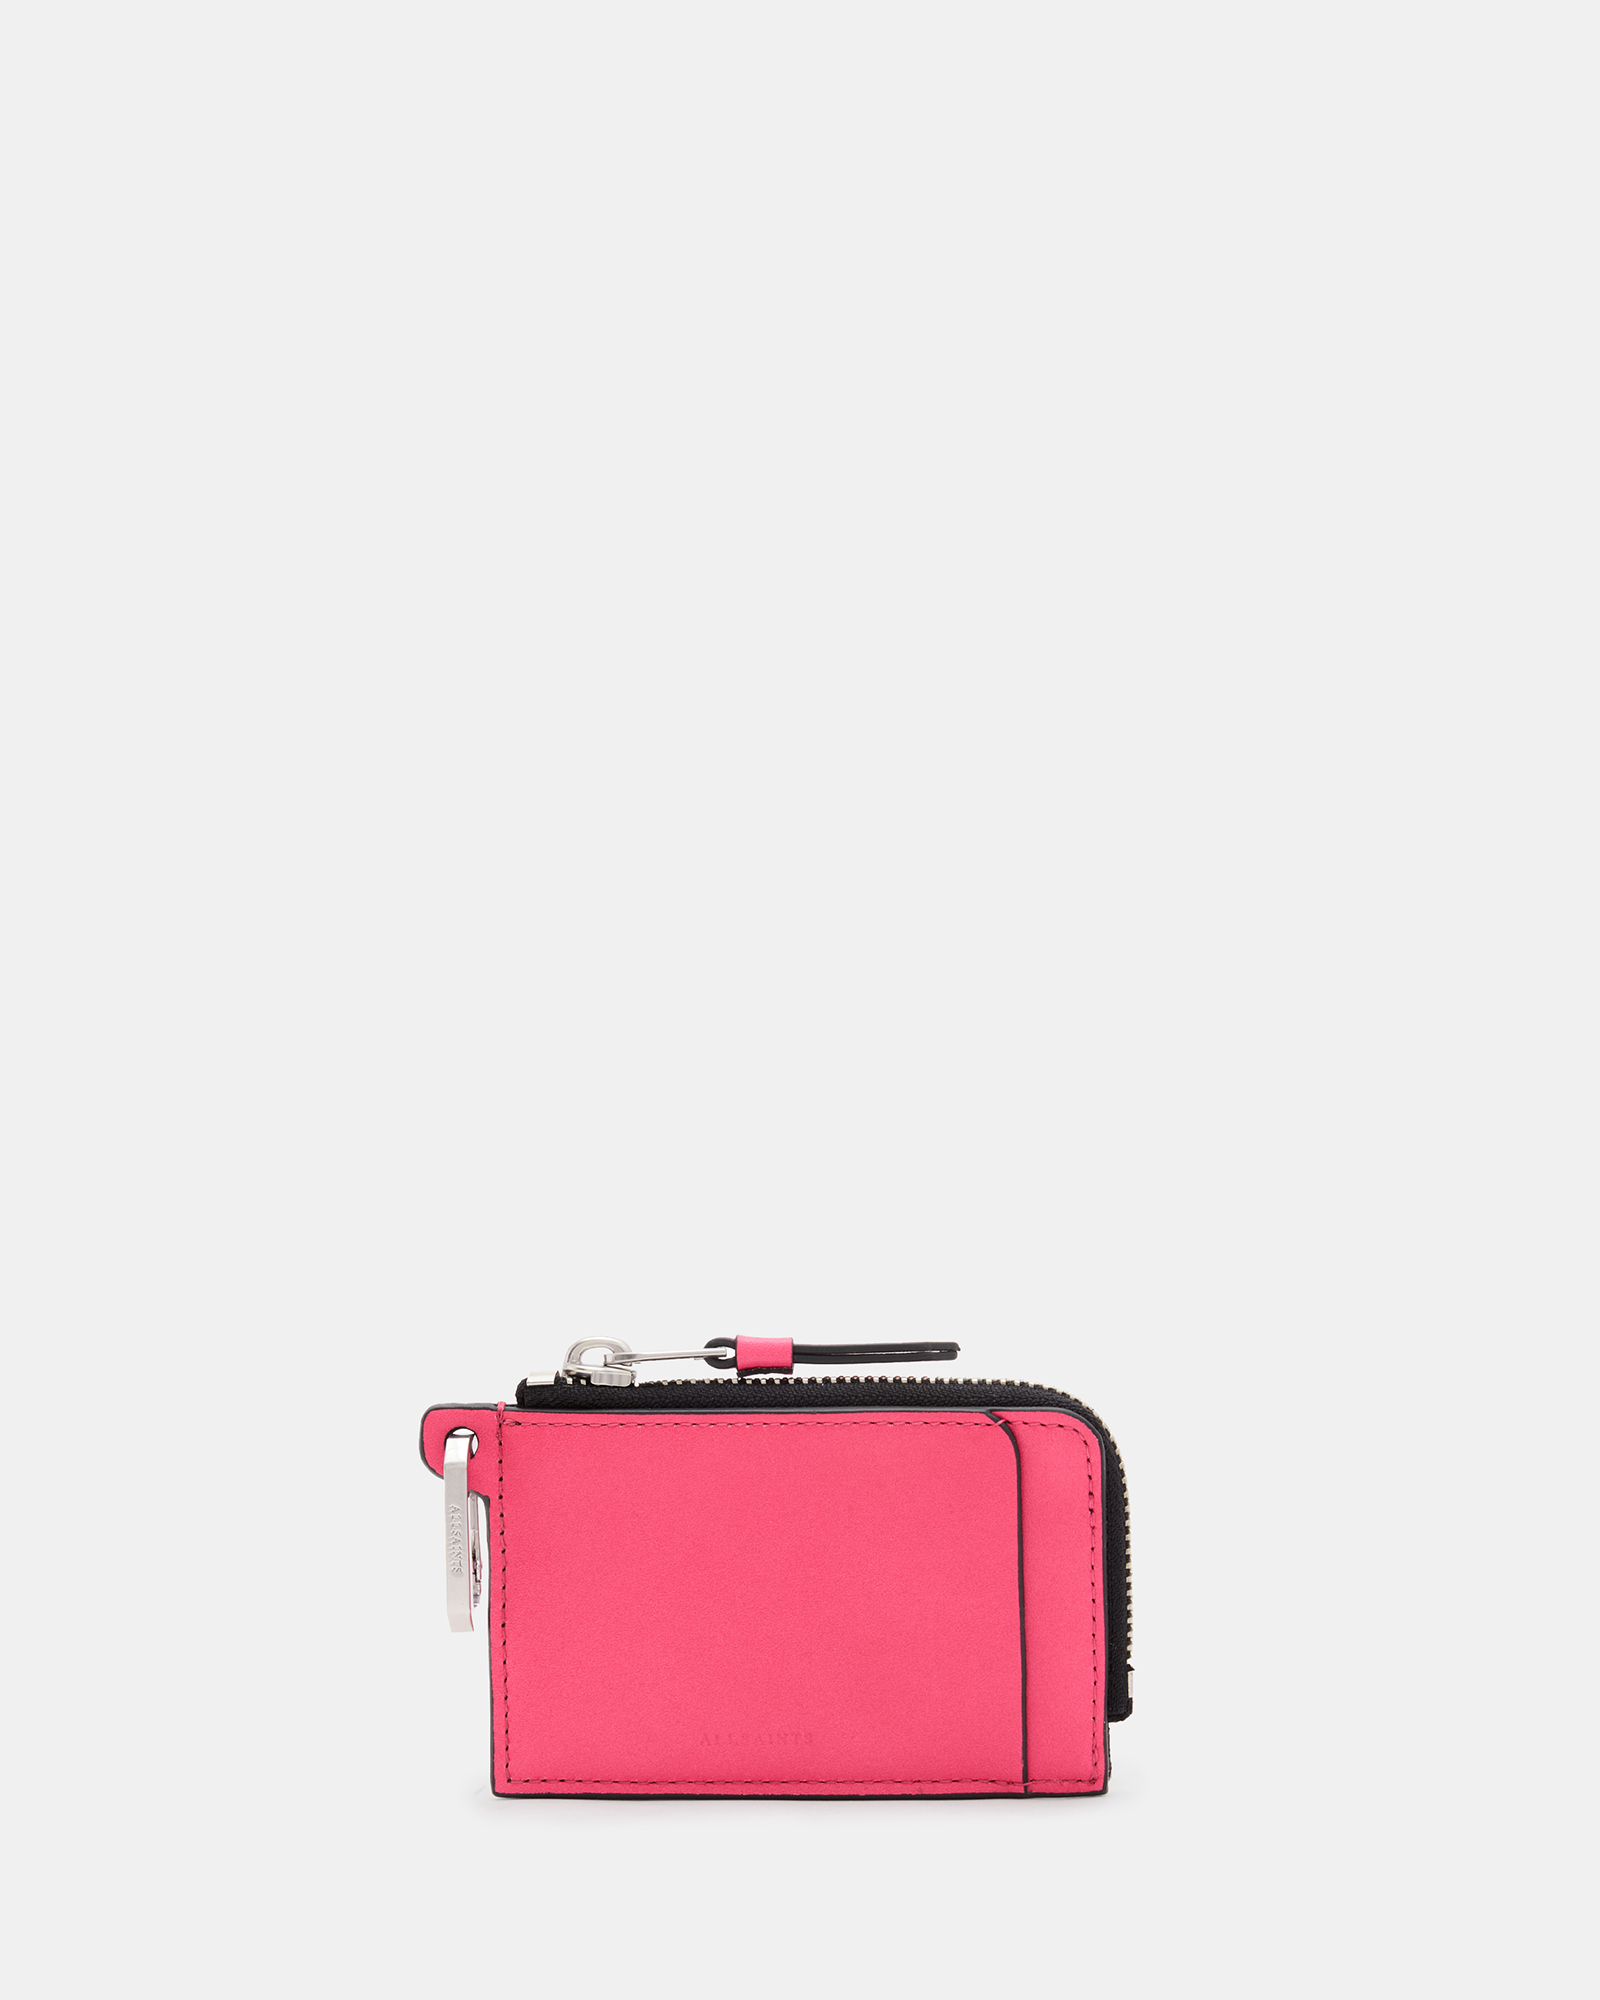 AllSaints Remy Leather Wallet,, Hot Pink